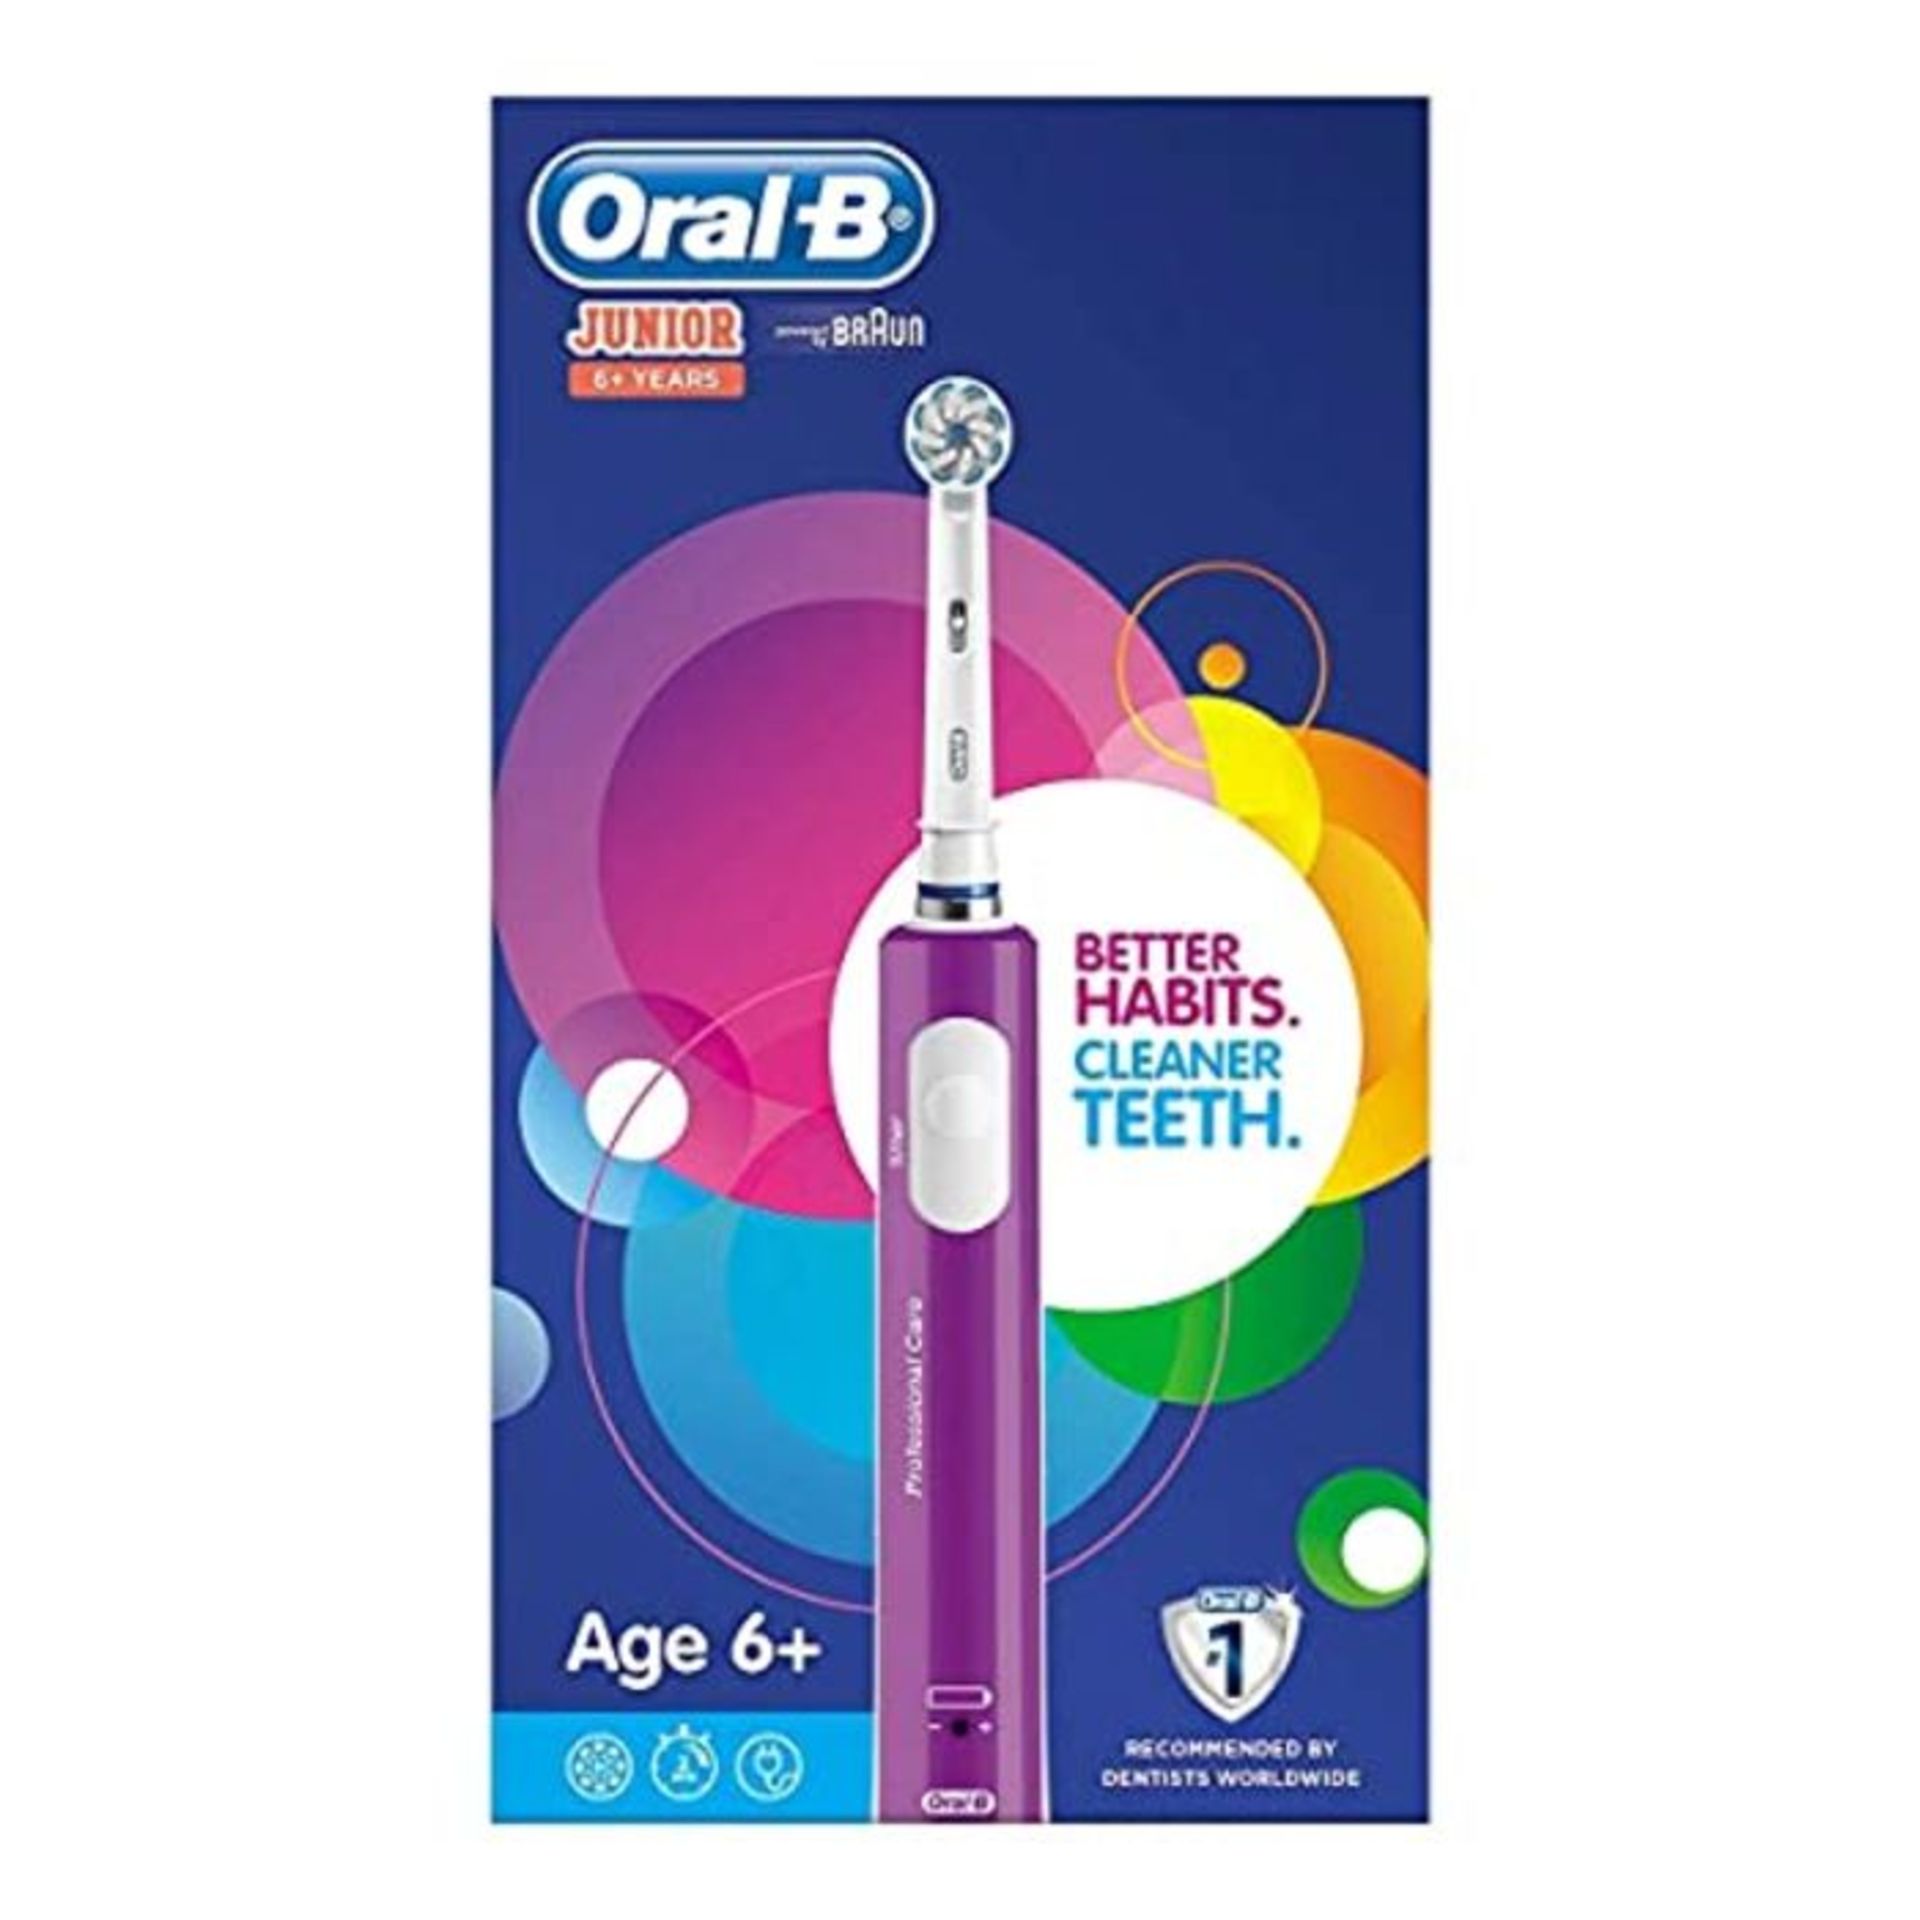 Oral-B Junior Kids Electric Rechargeable Toothbrush for Children Age 6-12, 1 Brush Han